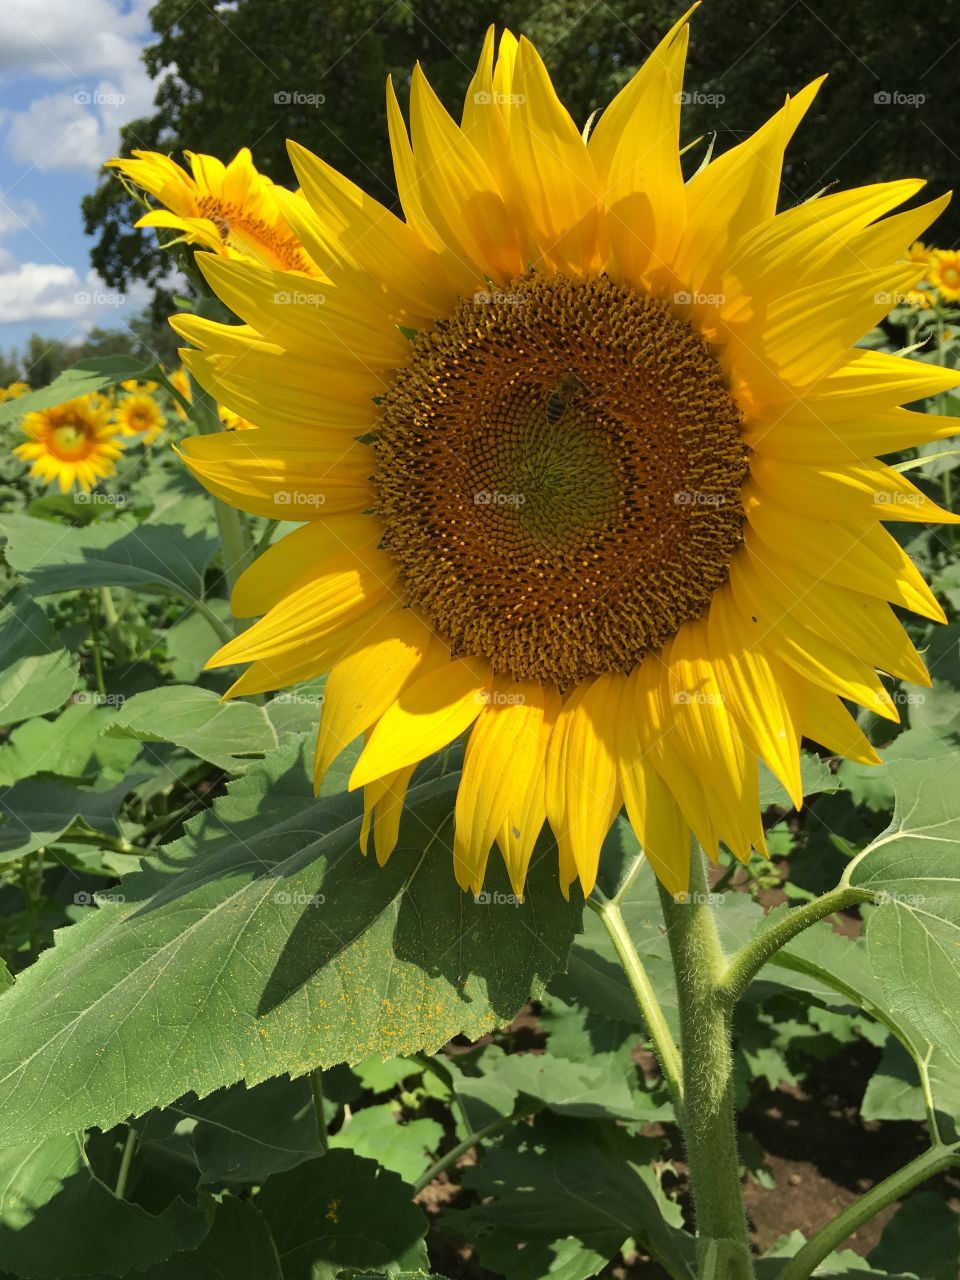 Up close with a sunflower